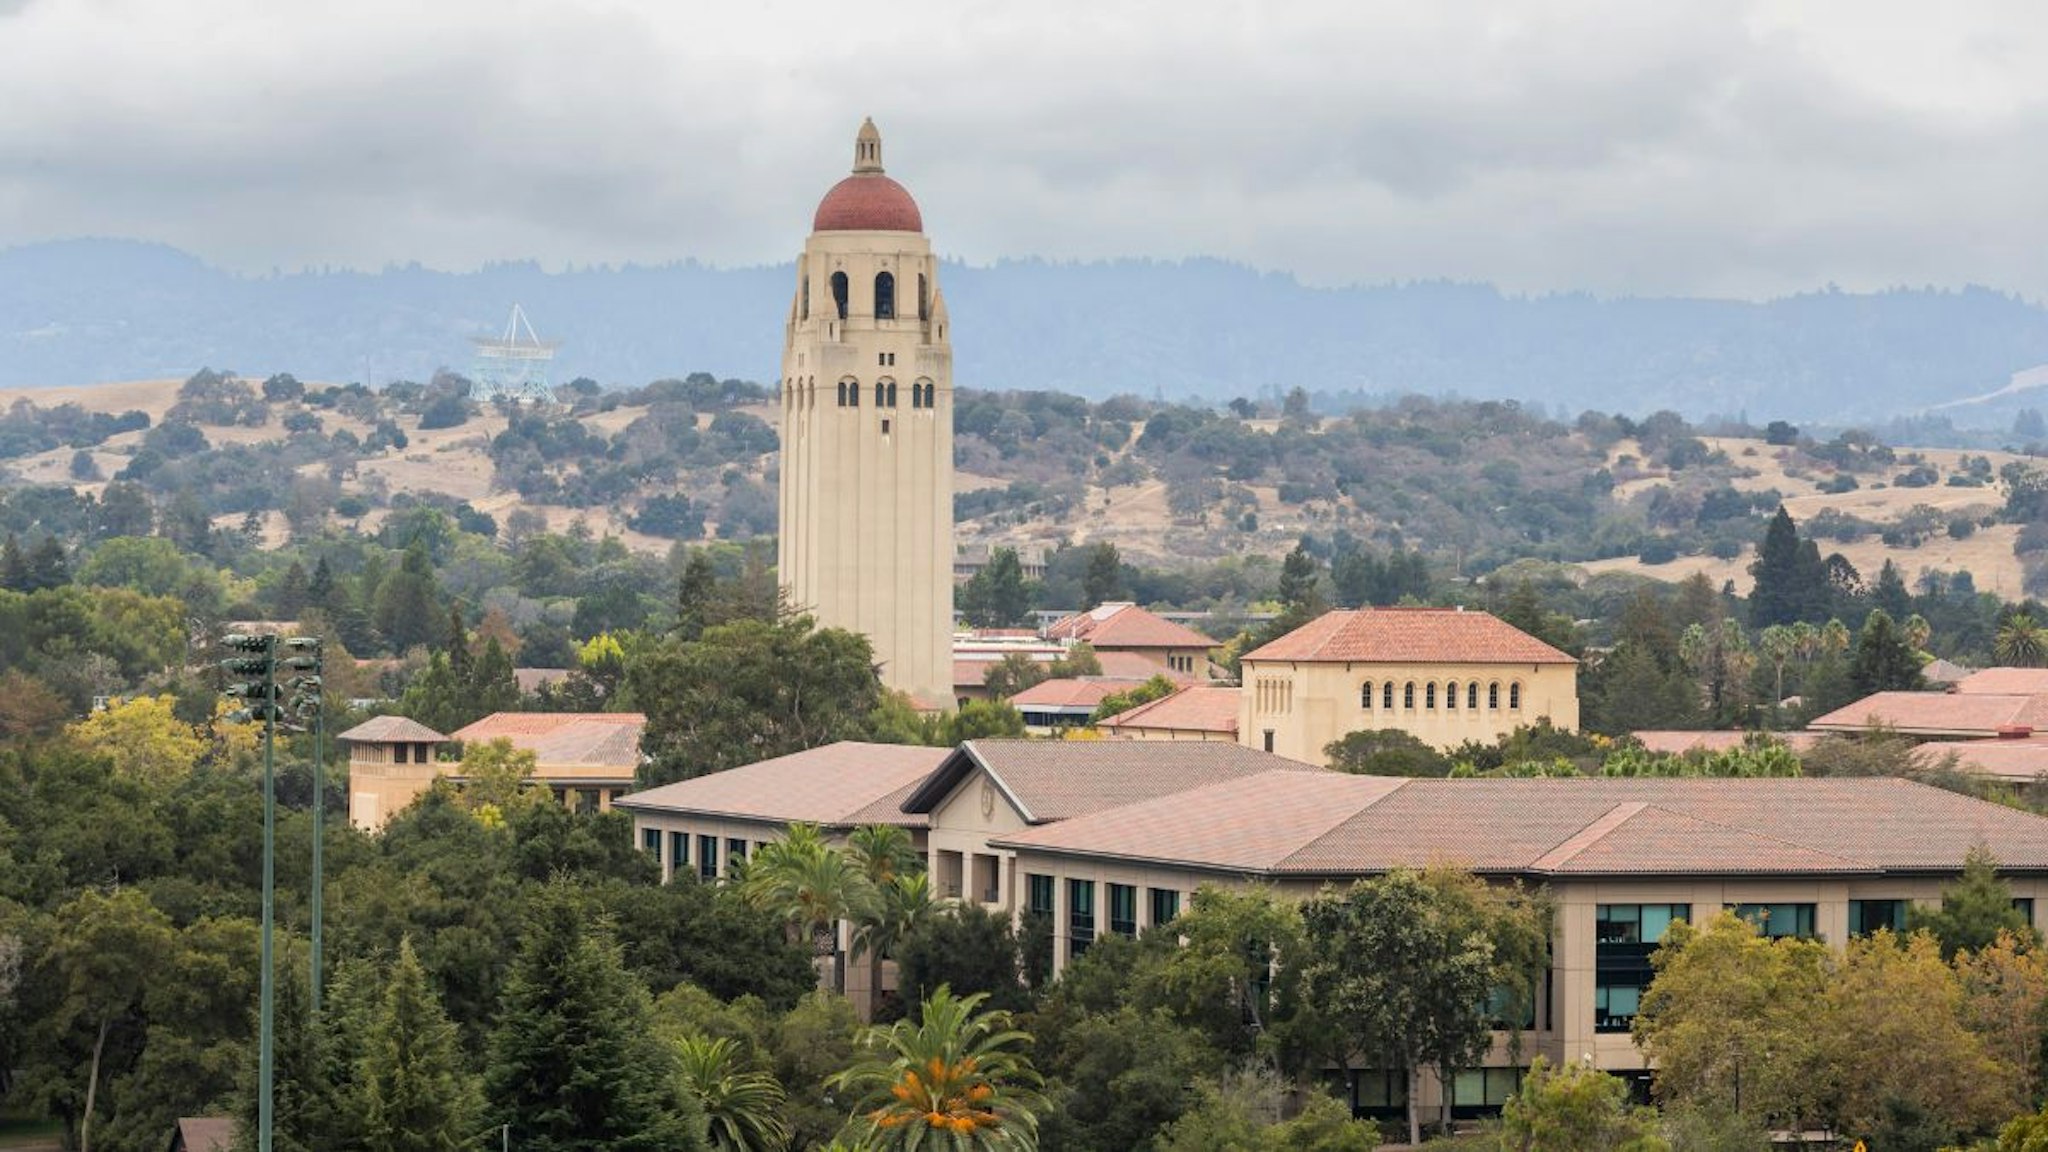 A general view of the campus of Stanford University including Hoover Tower as seen from Stanford Stadium on the day of a Pac-12 college football game between the USC Trojans and the Stanford Cardinal played on September 10, 2022 in Palo Alto, California.